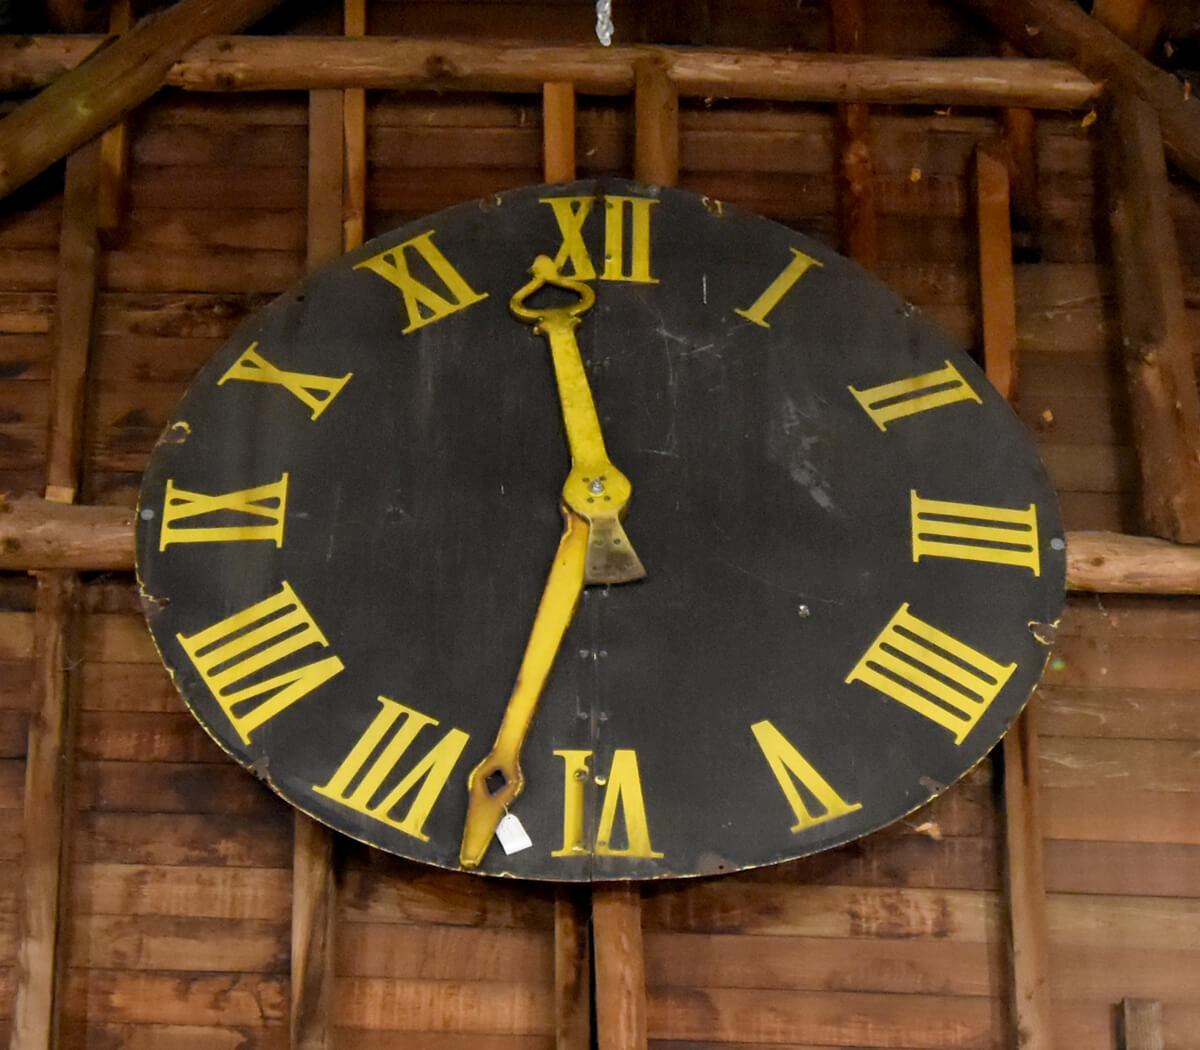 Very big and Antique church clock from the 19th Century.
Comes from a churck in Belgium.
(Be aware: the dimensions should be checked)